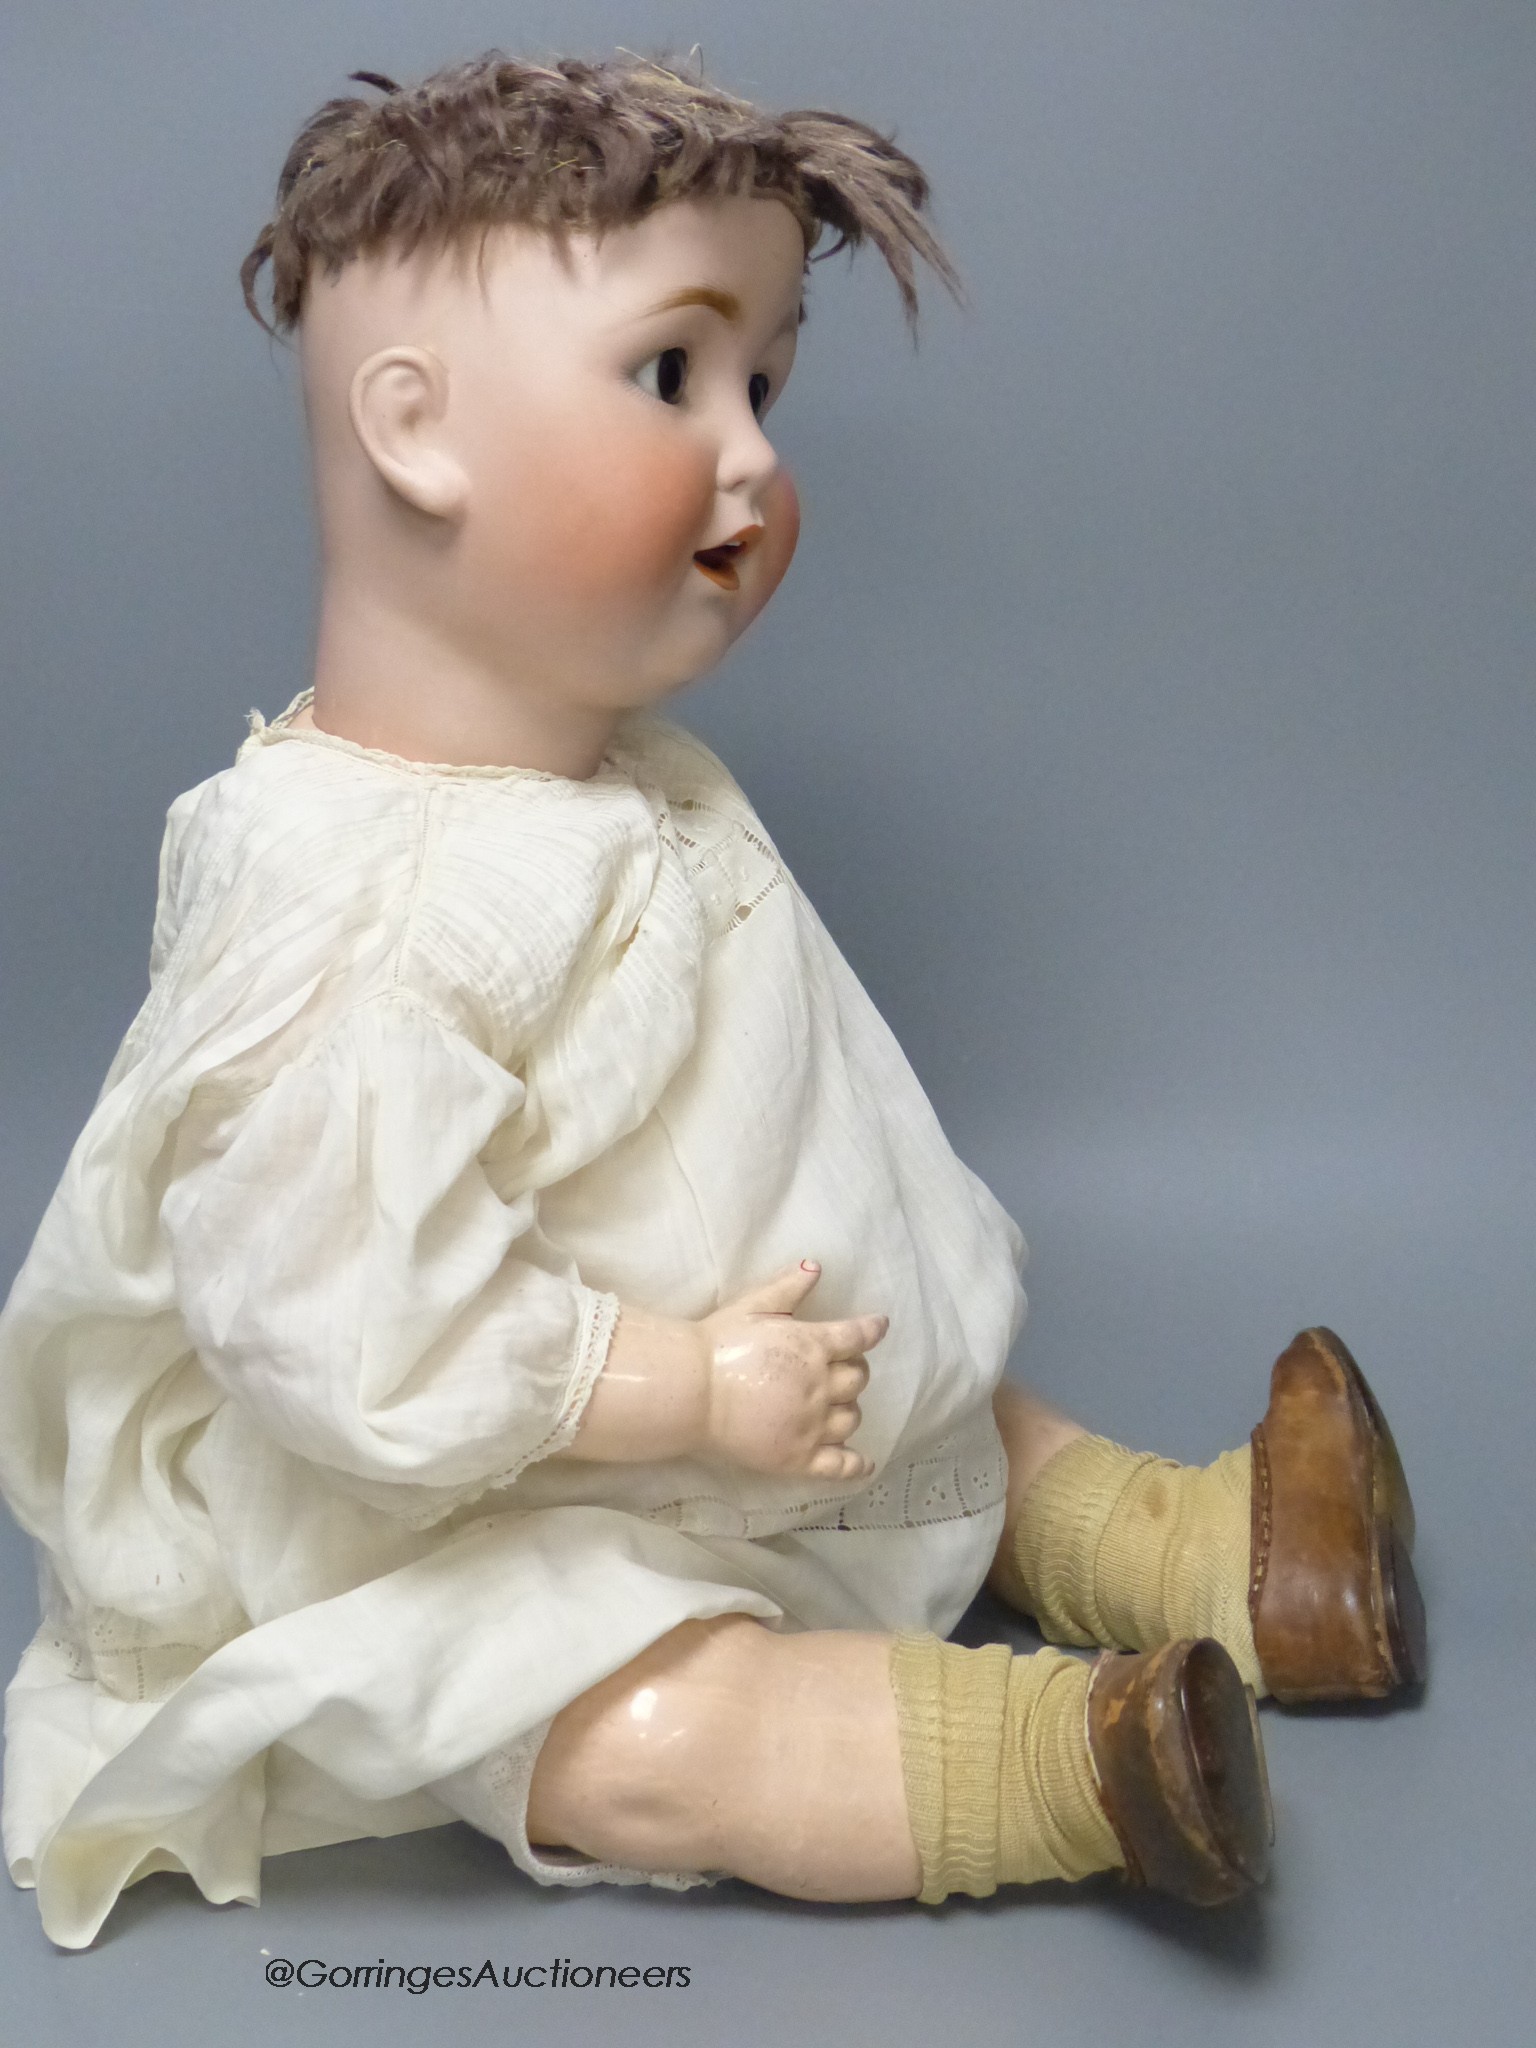 A German bisque headed doll, by Catterfelder Puppenfabrik marked CP58 - Image 2 of 4